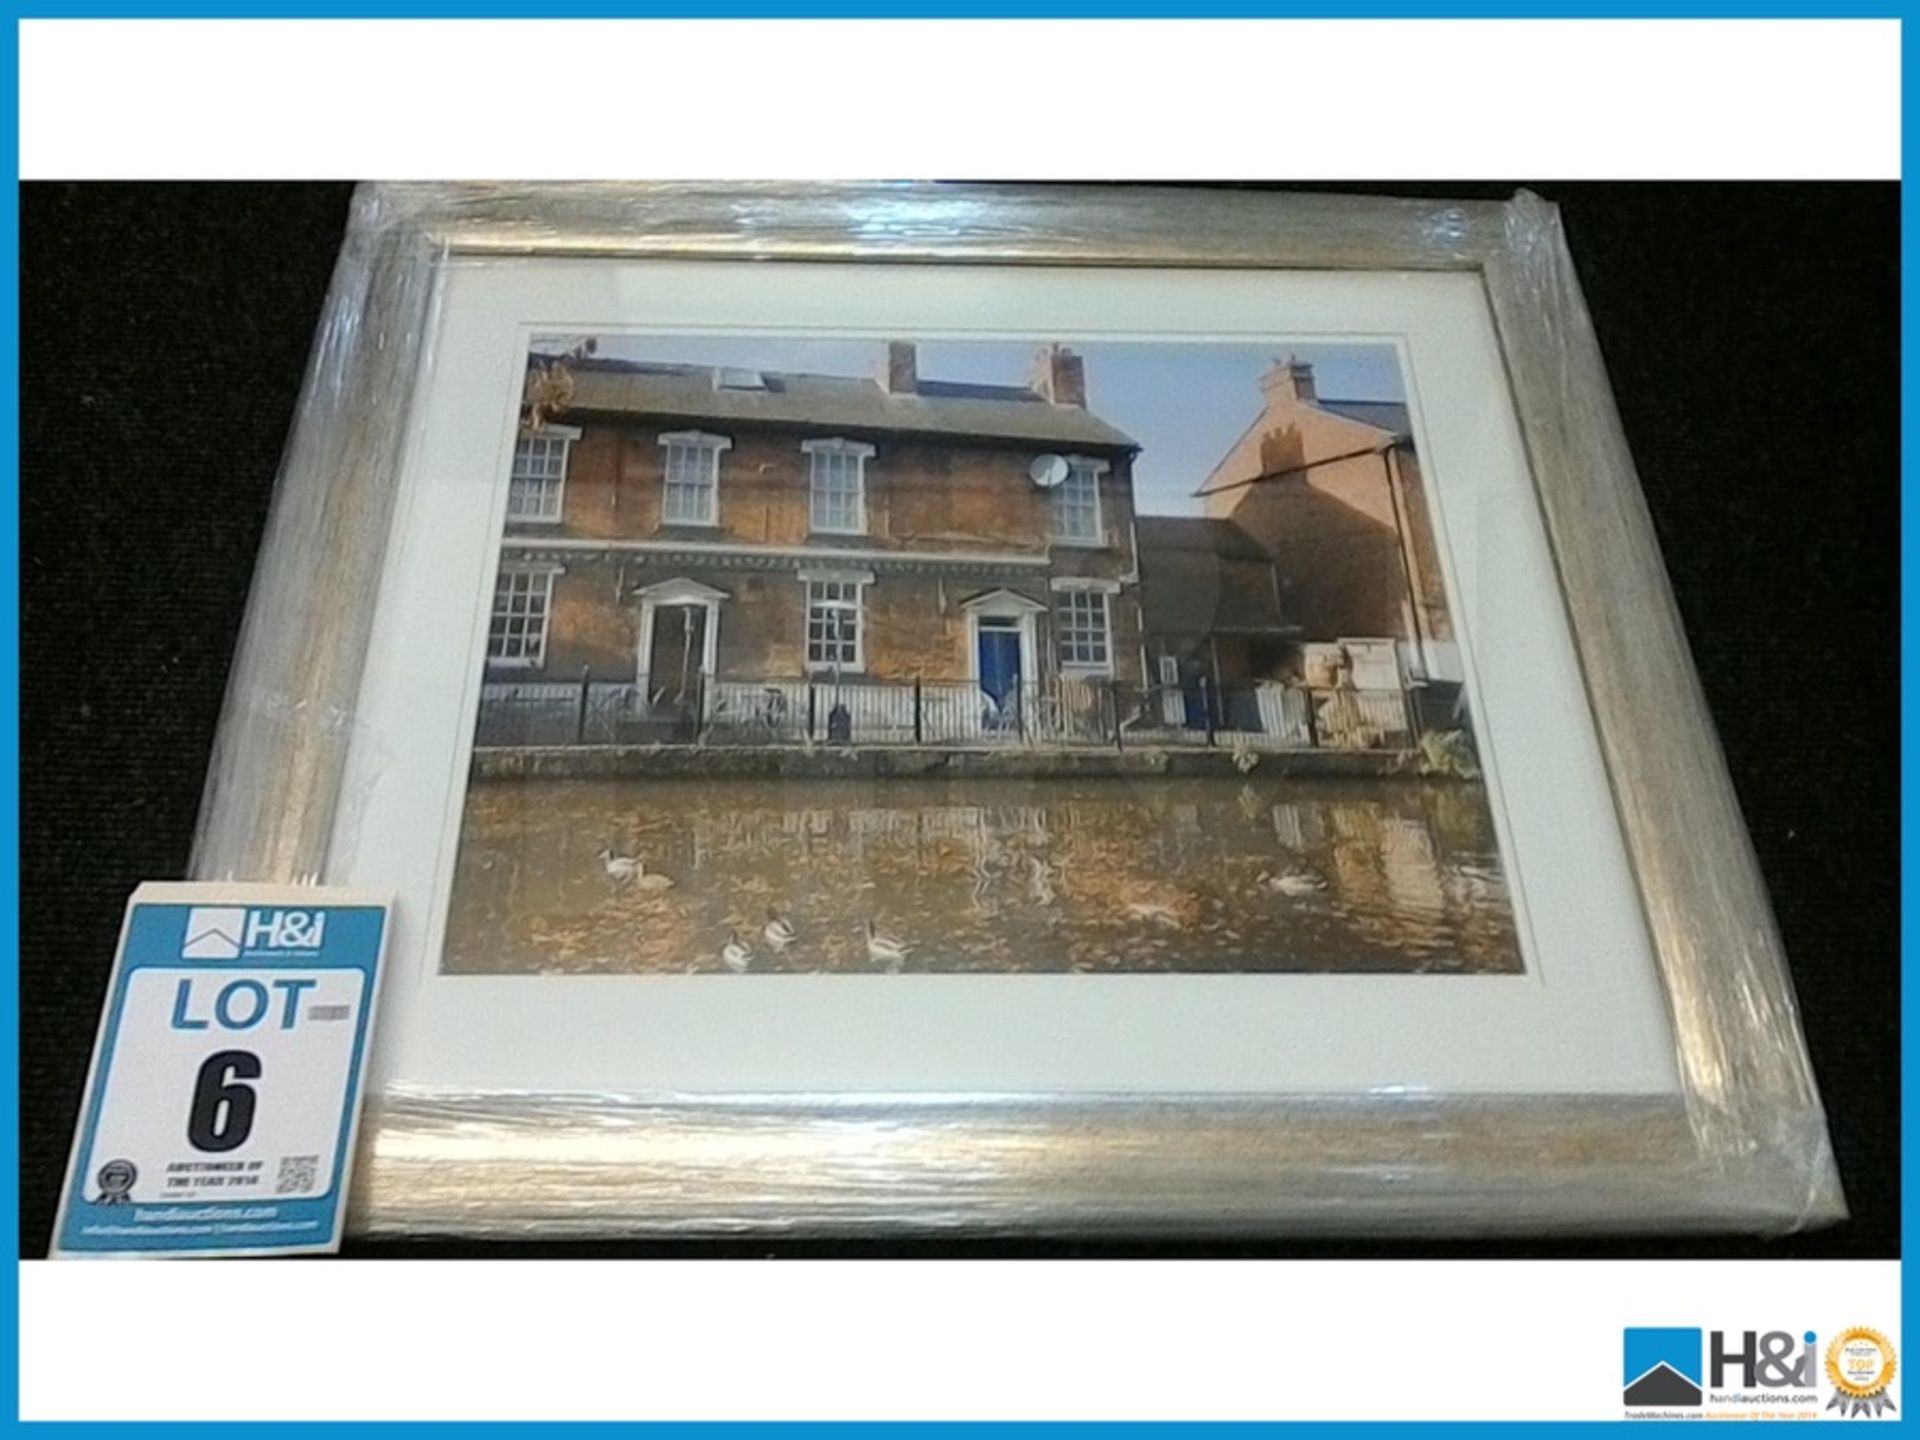 NEW DESIGNER RUSTIC GOLD METALIC FINISH FRAME DISPLAYING A LANDSCAPE OF A STREET SCENE DIMENSIONS: